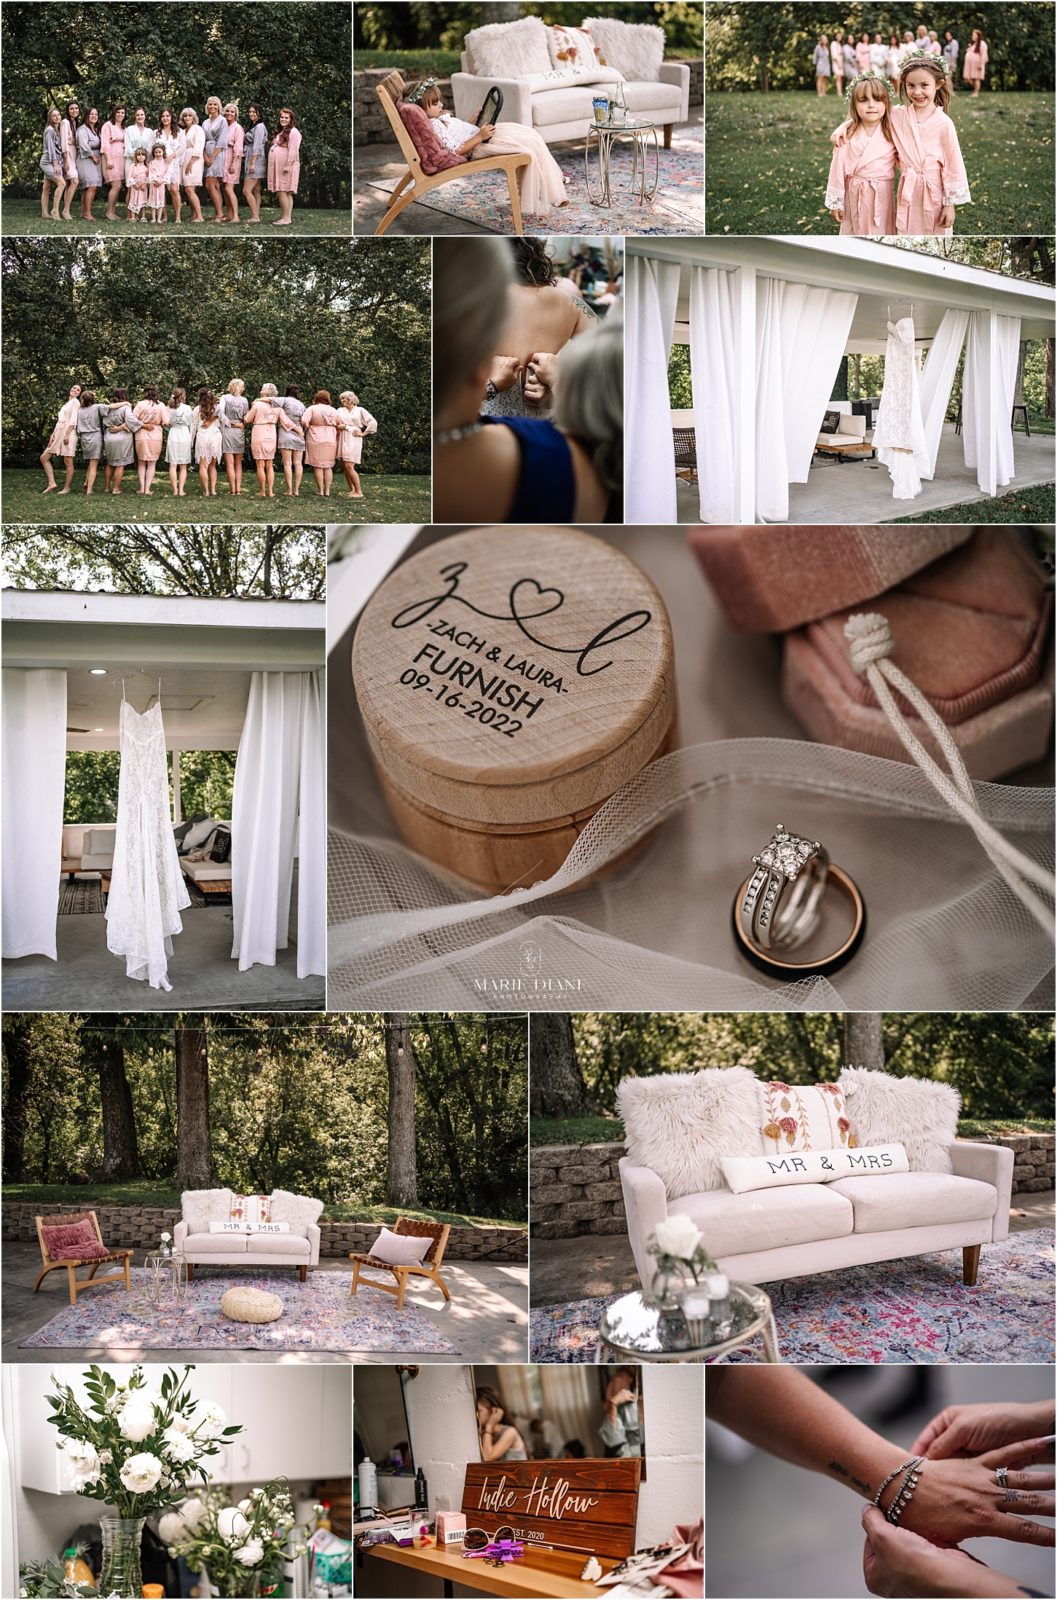 Bridal prep and details from boho wedding at Indie Hollow venue